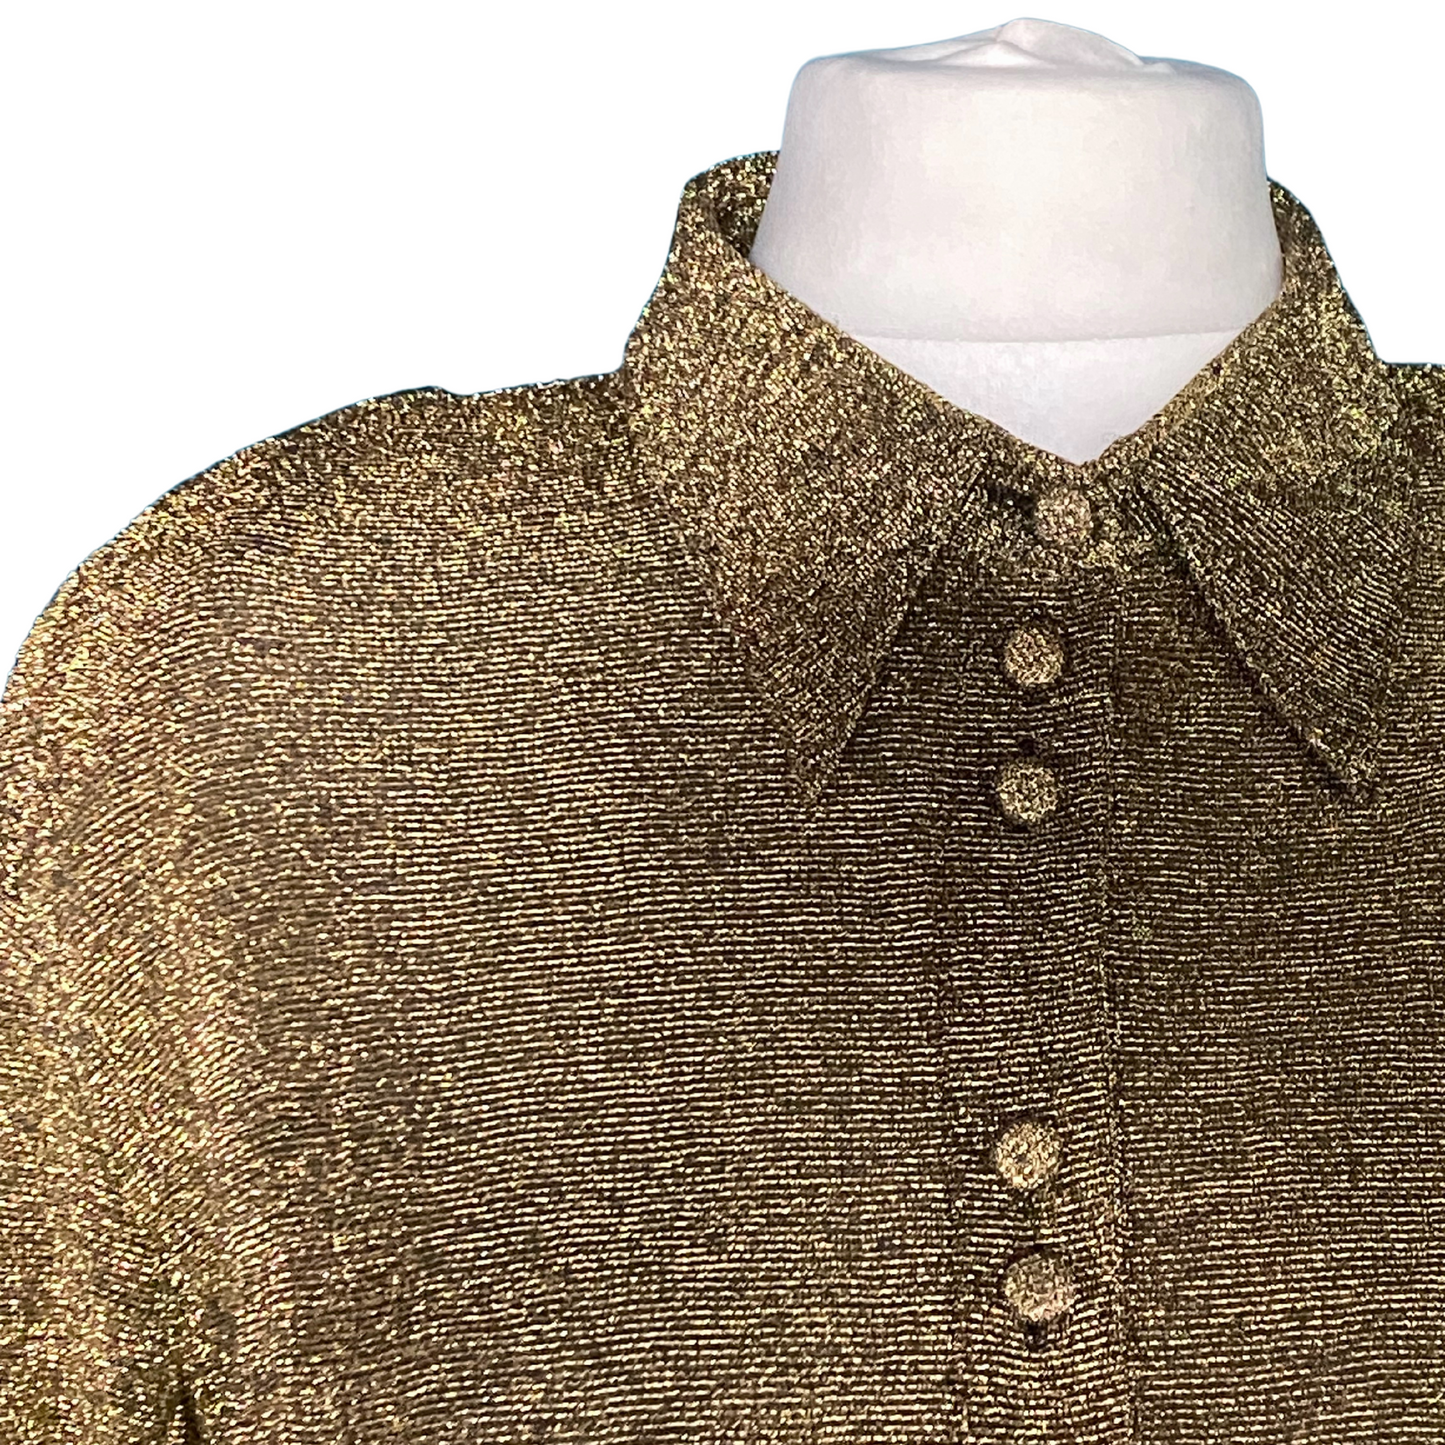 Step back in time with this 70s/80s gold glitter shirt, complete with a chic dagger collar.